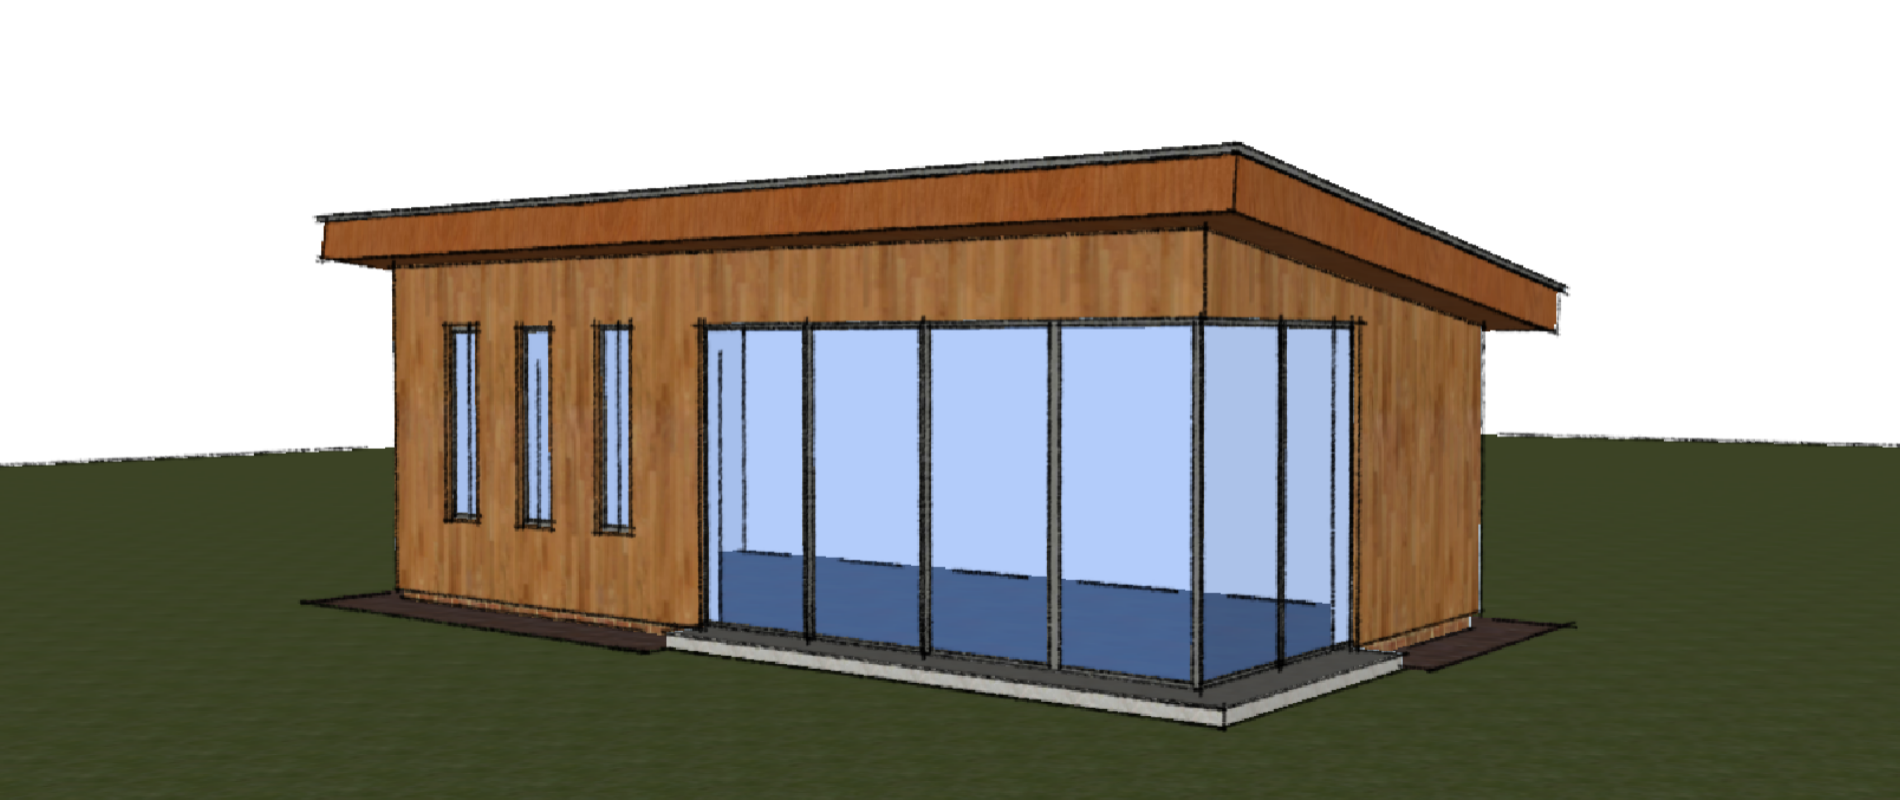 do i need planning permission for a shed or garden room